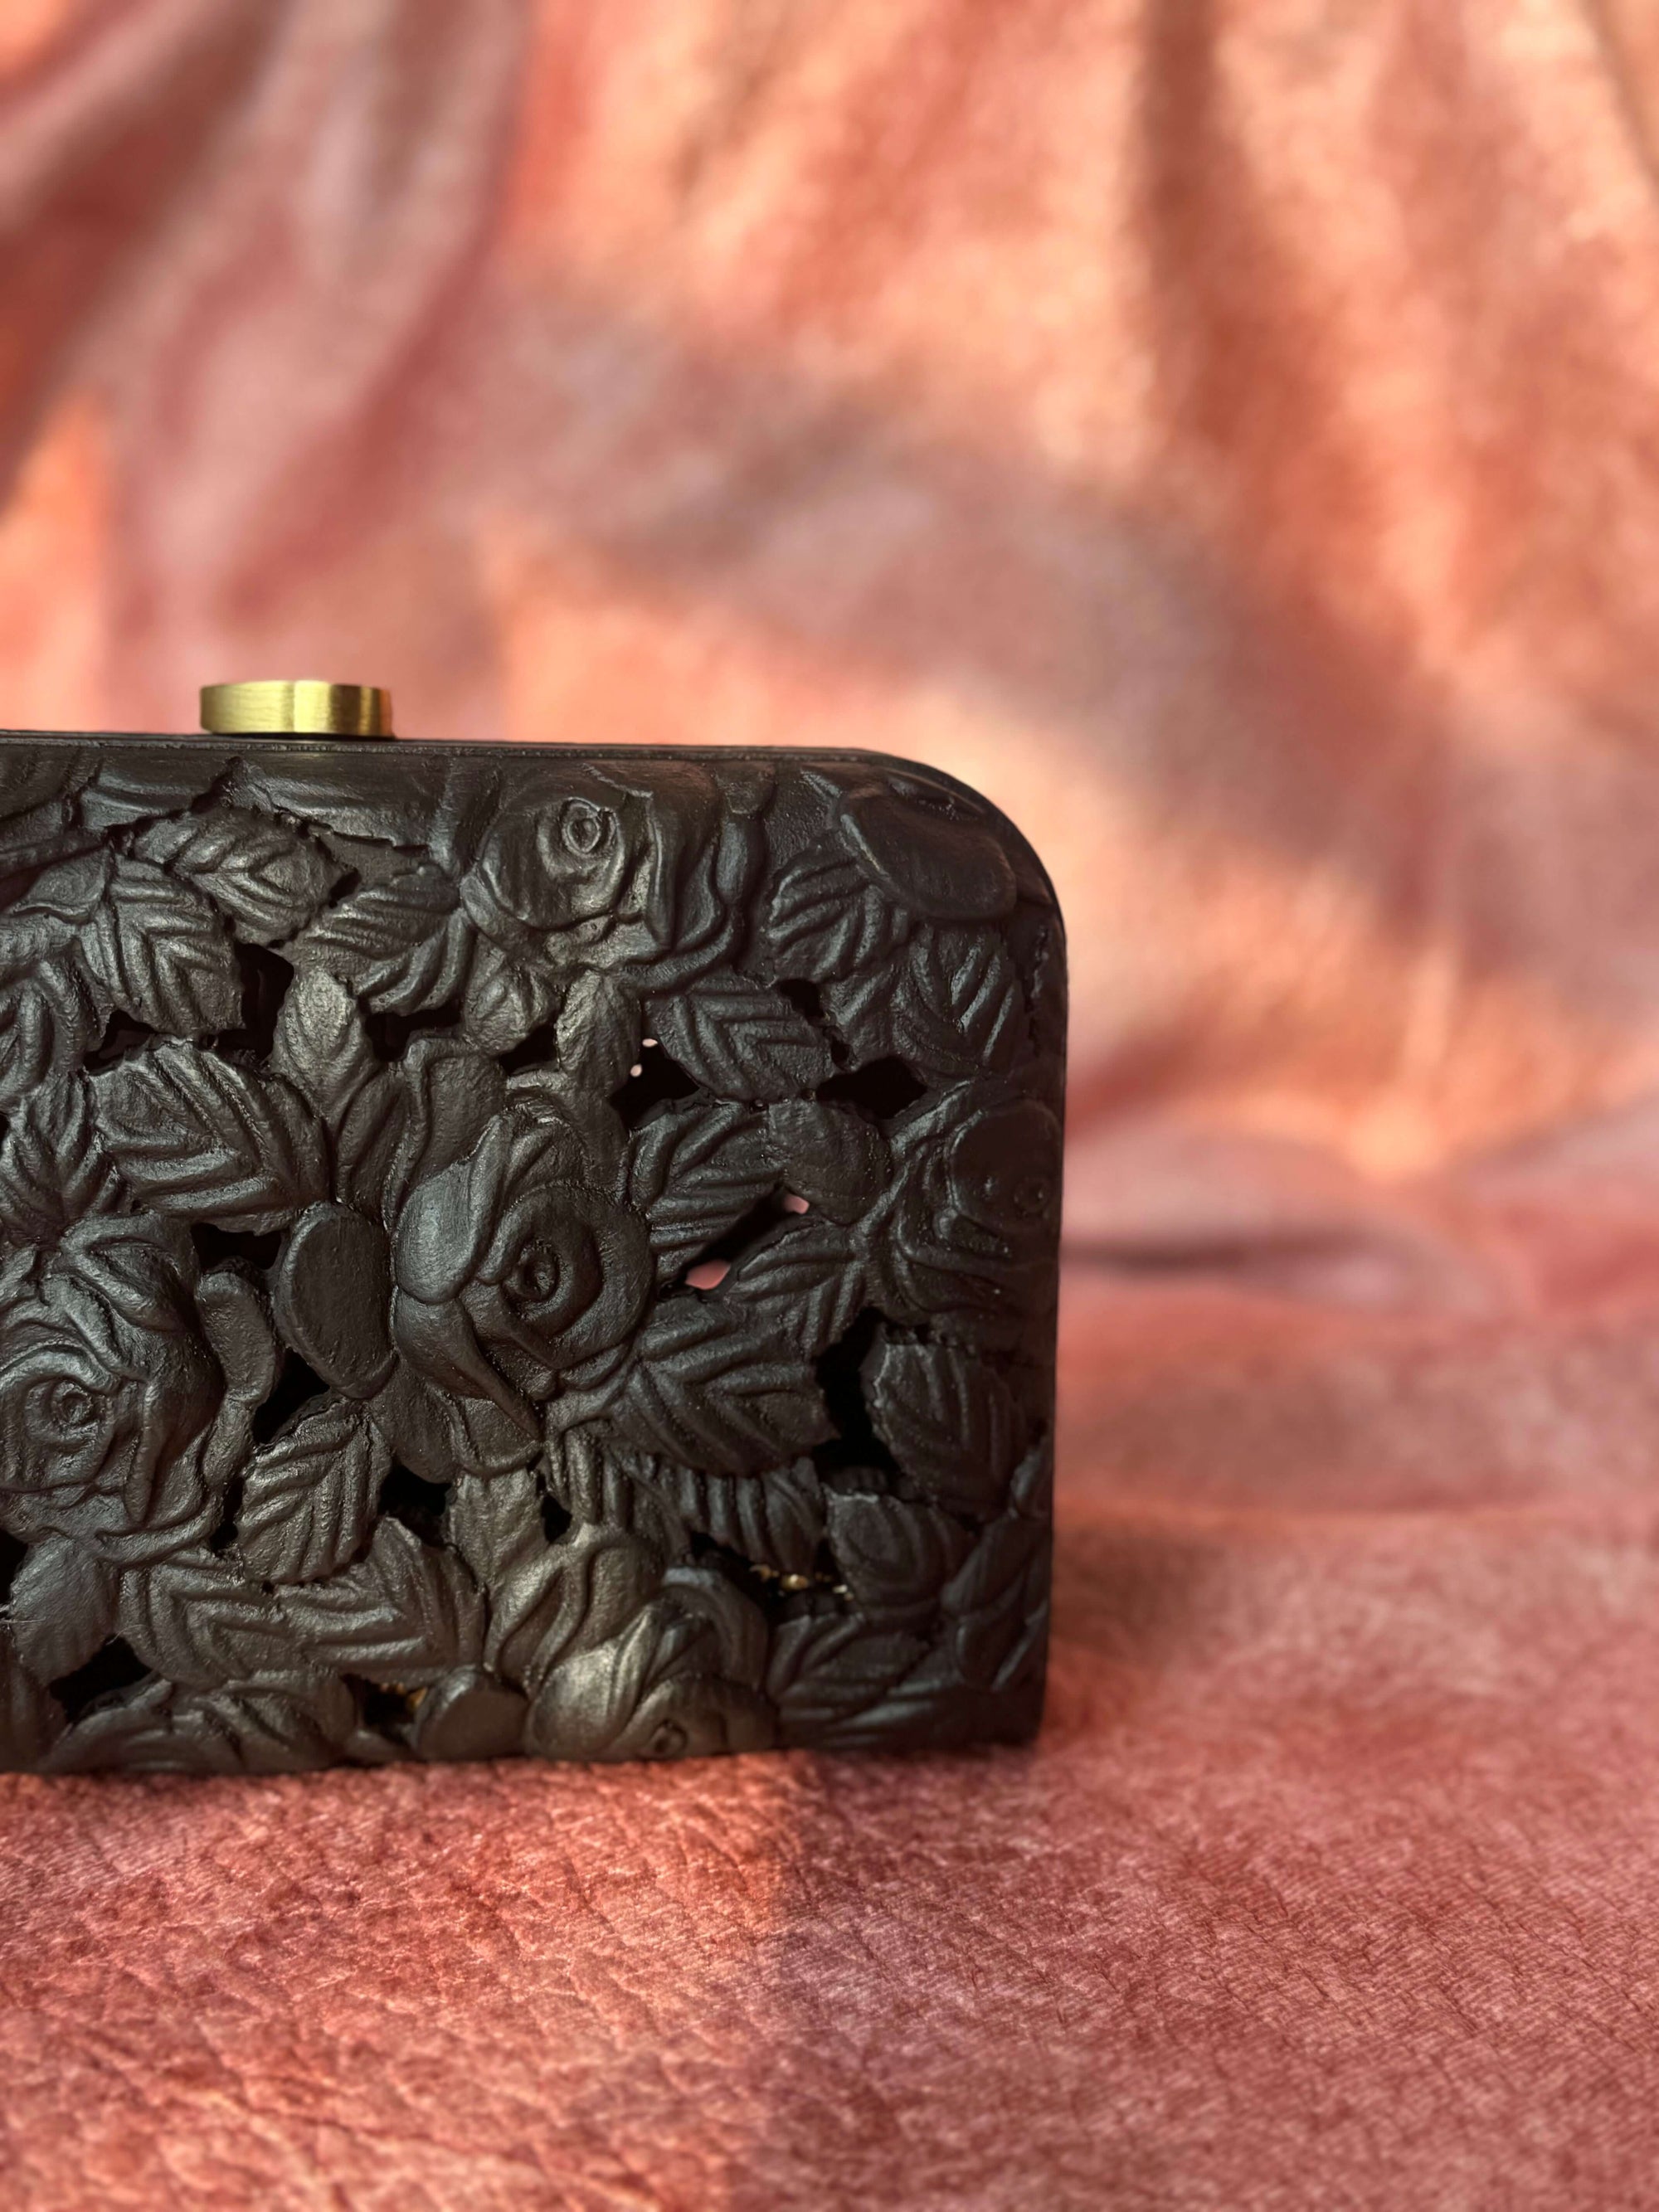 Carved wood clutch with delicate roses and leaves in black finish